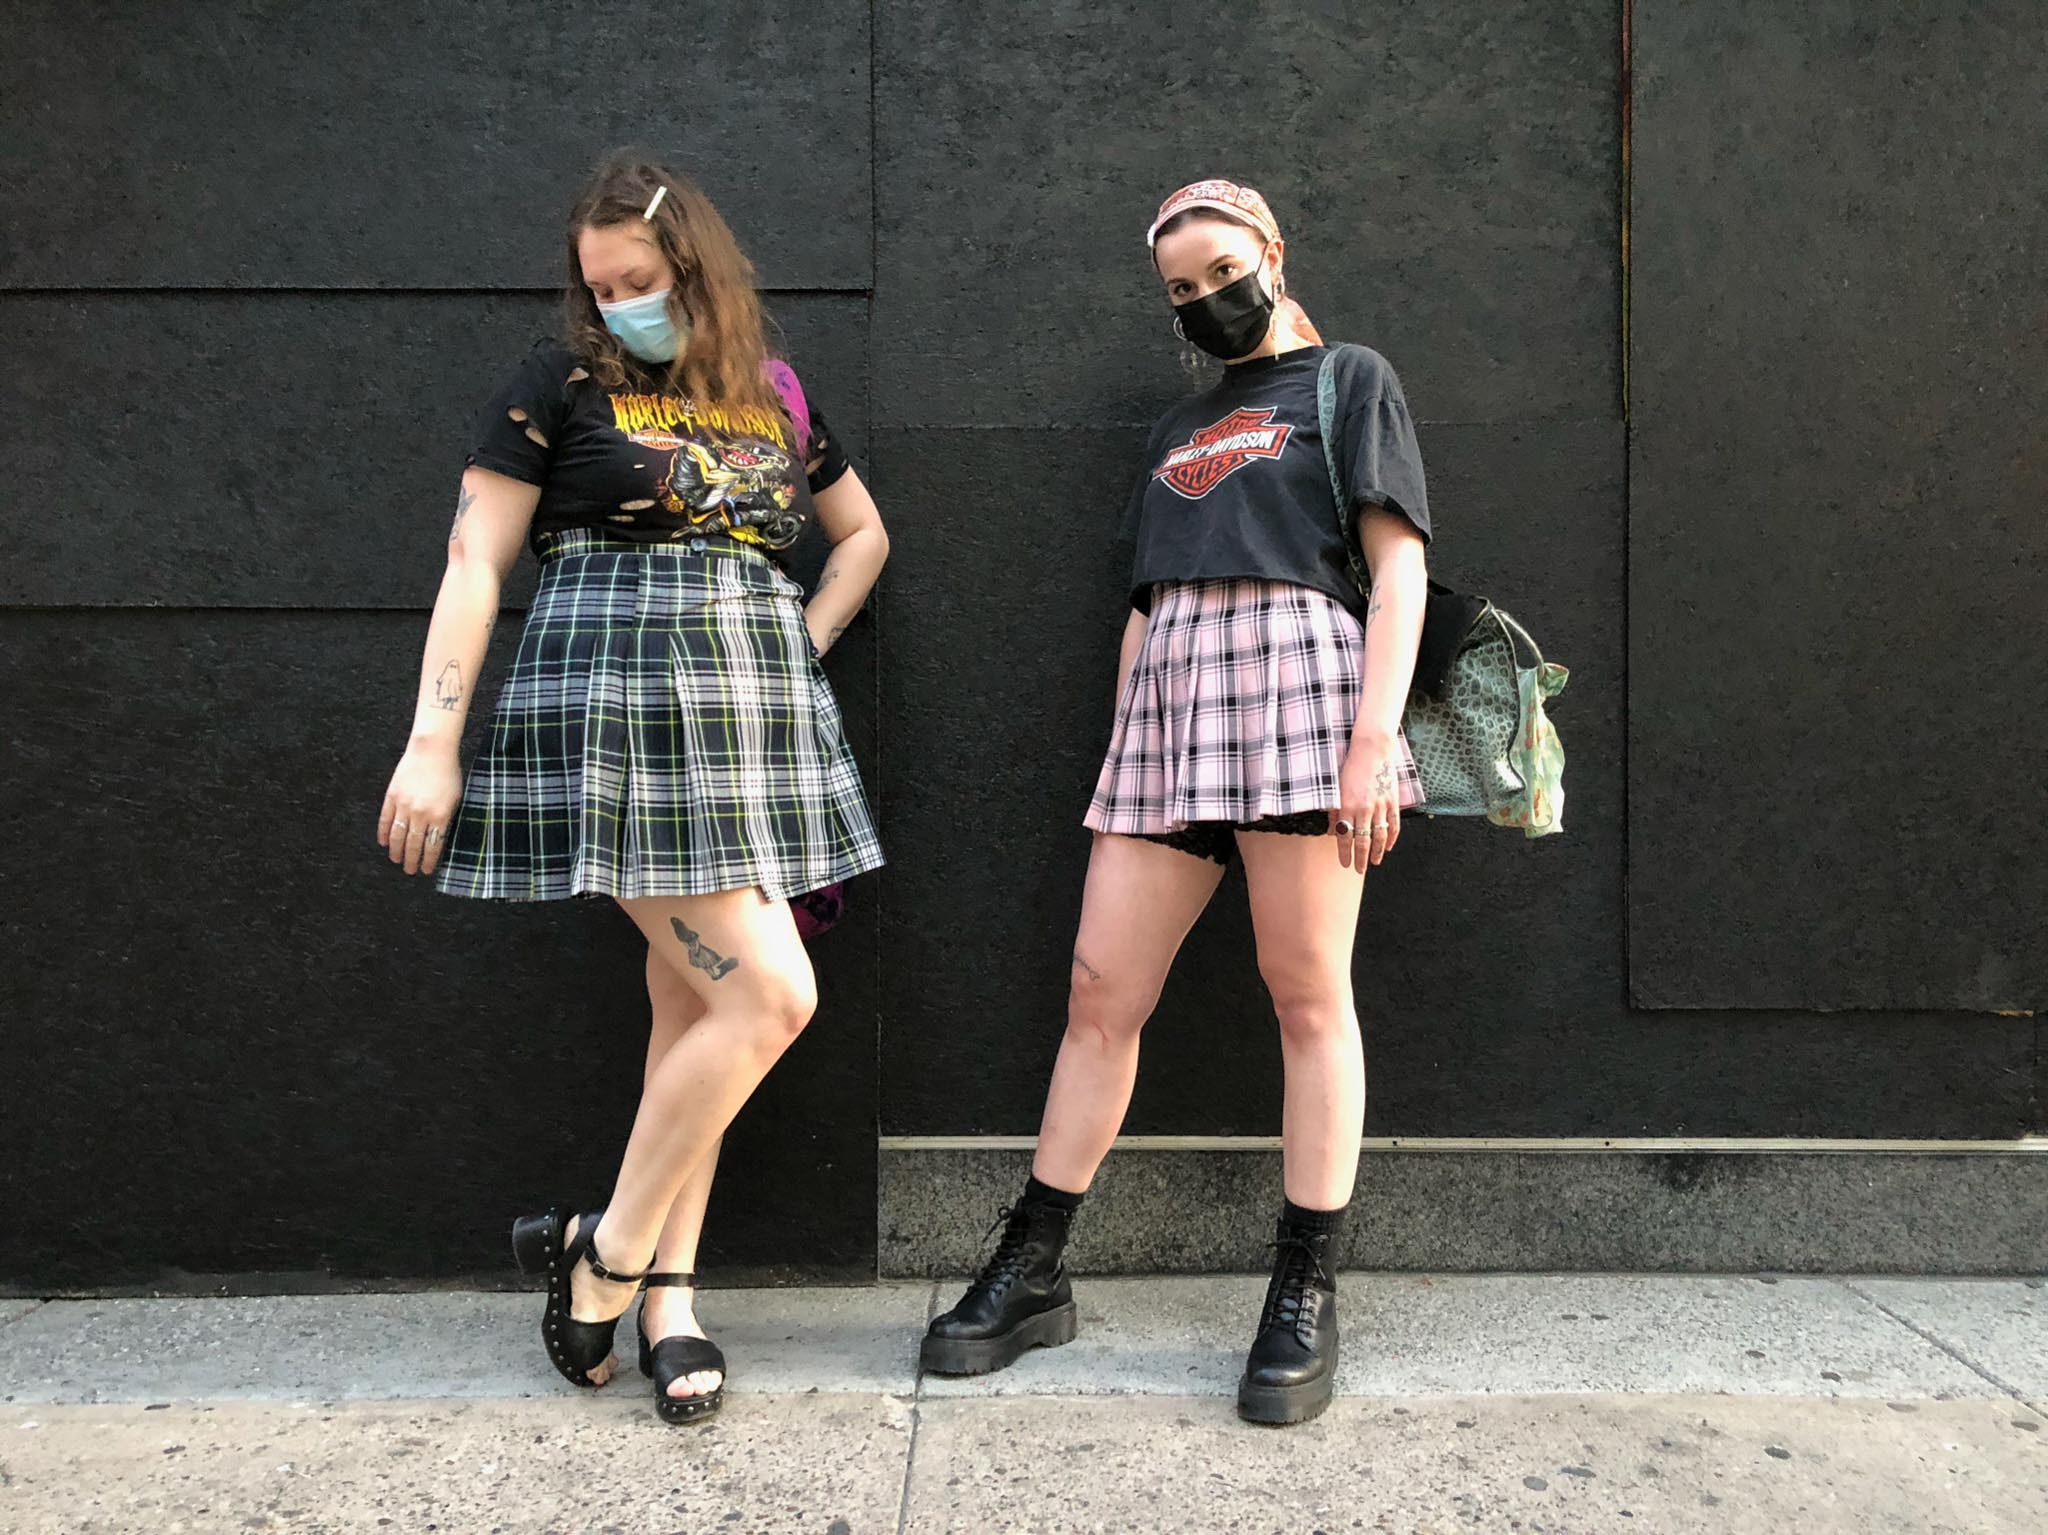 Two people stand on sidewalk in front of black wall wearing plaid skirts styled with vintage Harley Davidson t-shirts